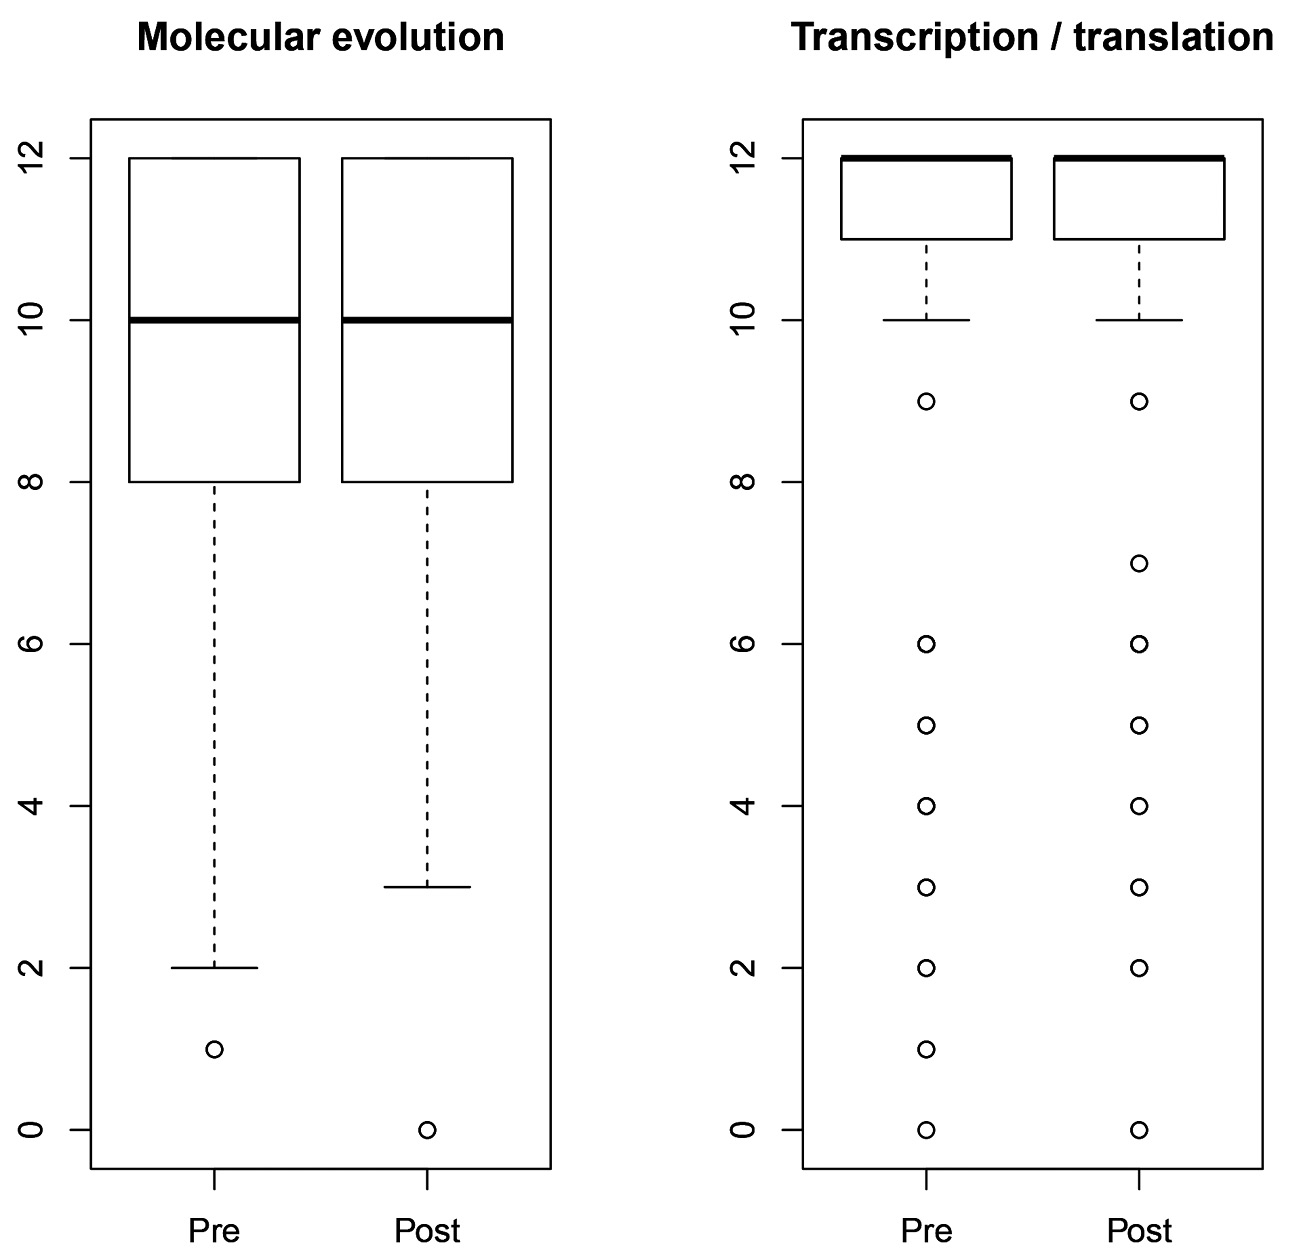 Figure 2. Boxplots showing pre- and postrevision performance on two final exam questions. These questions were graded on a 12-point scale and given on the final exam both before and after the course was revised.